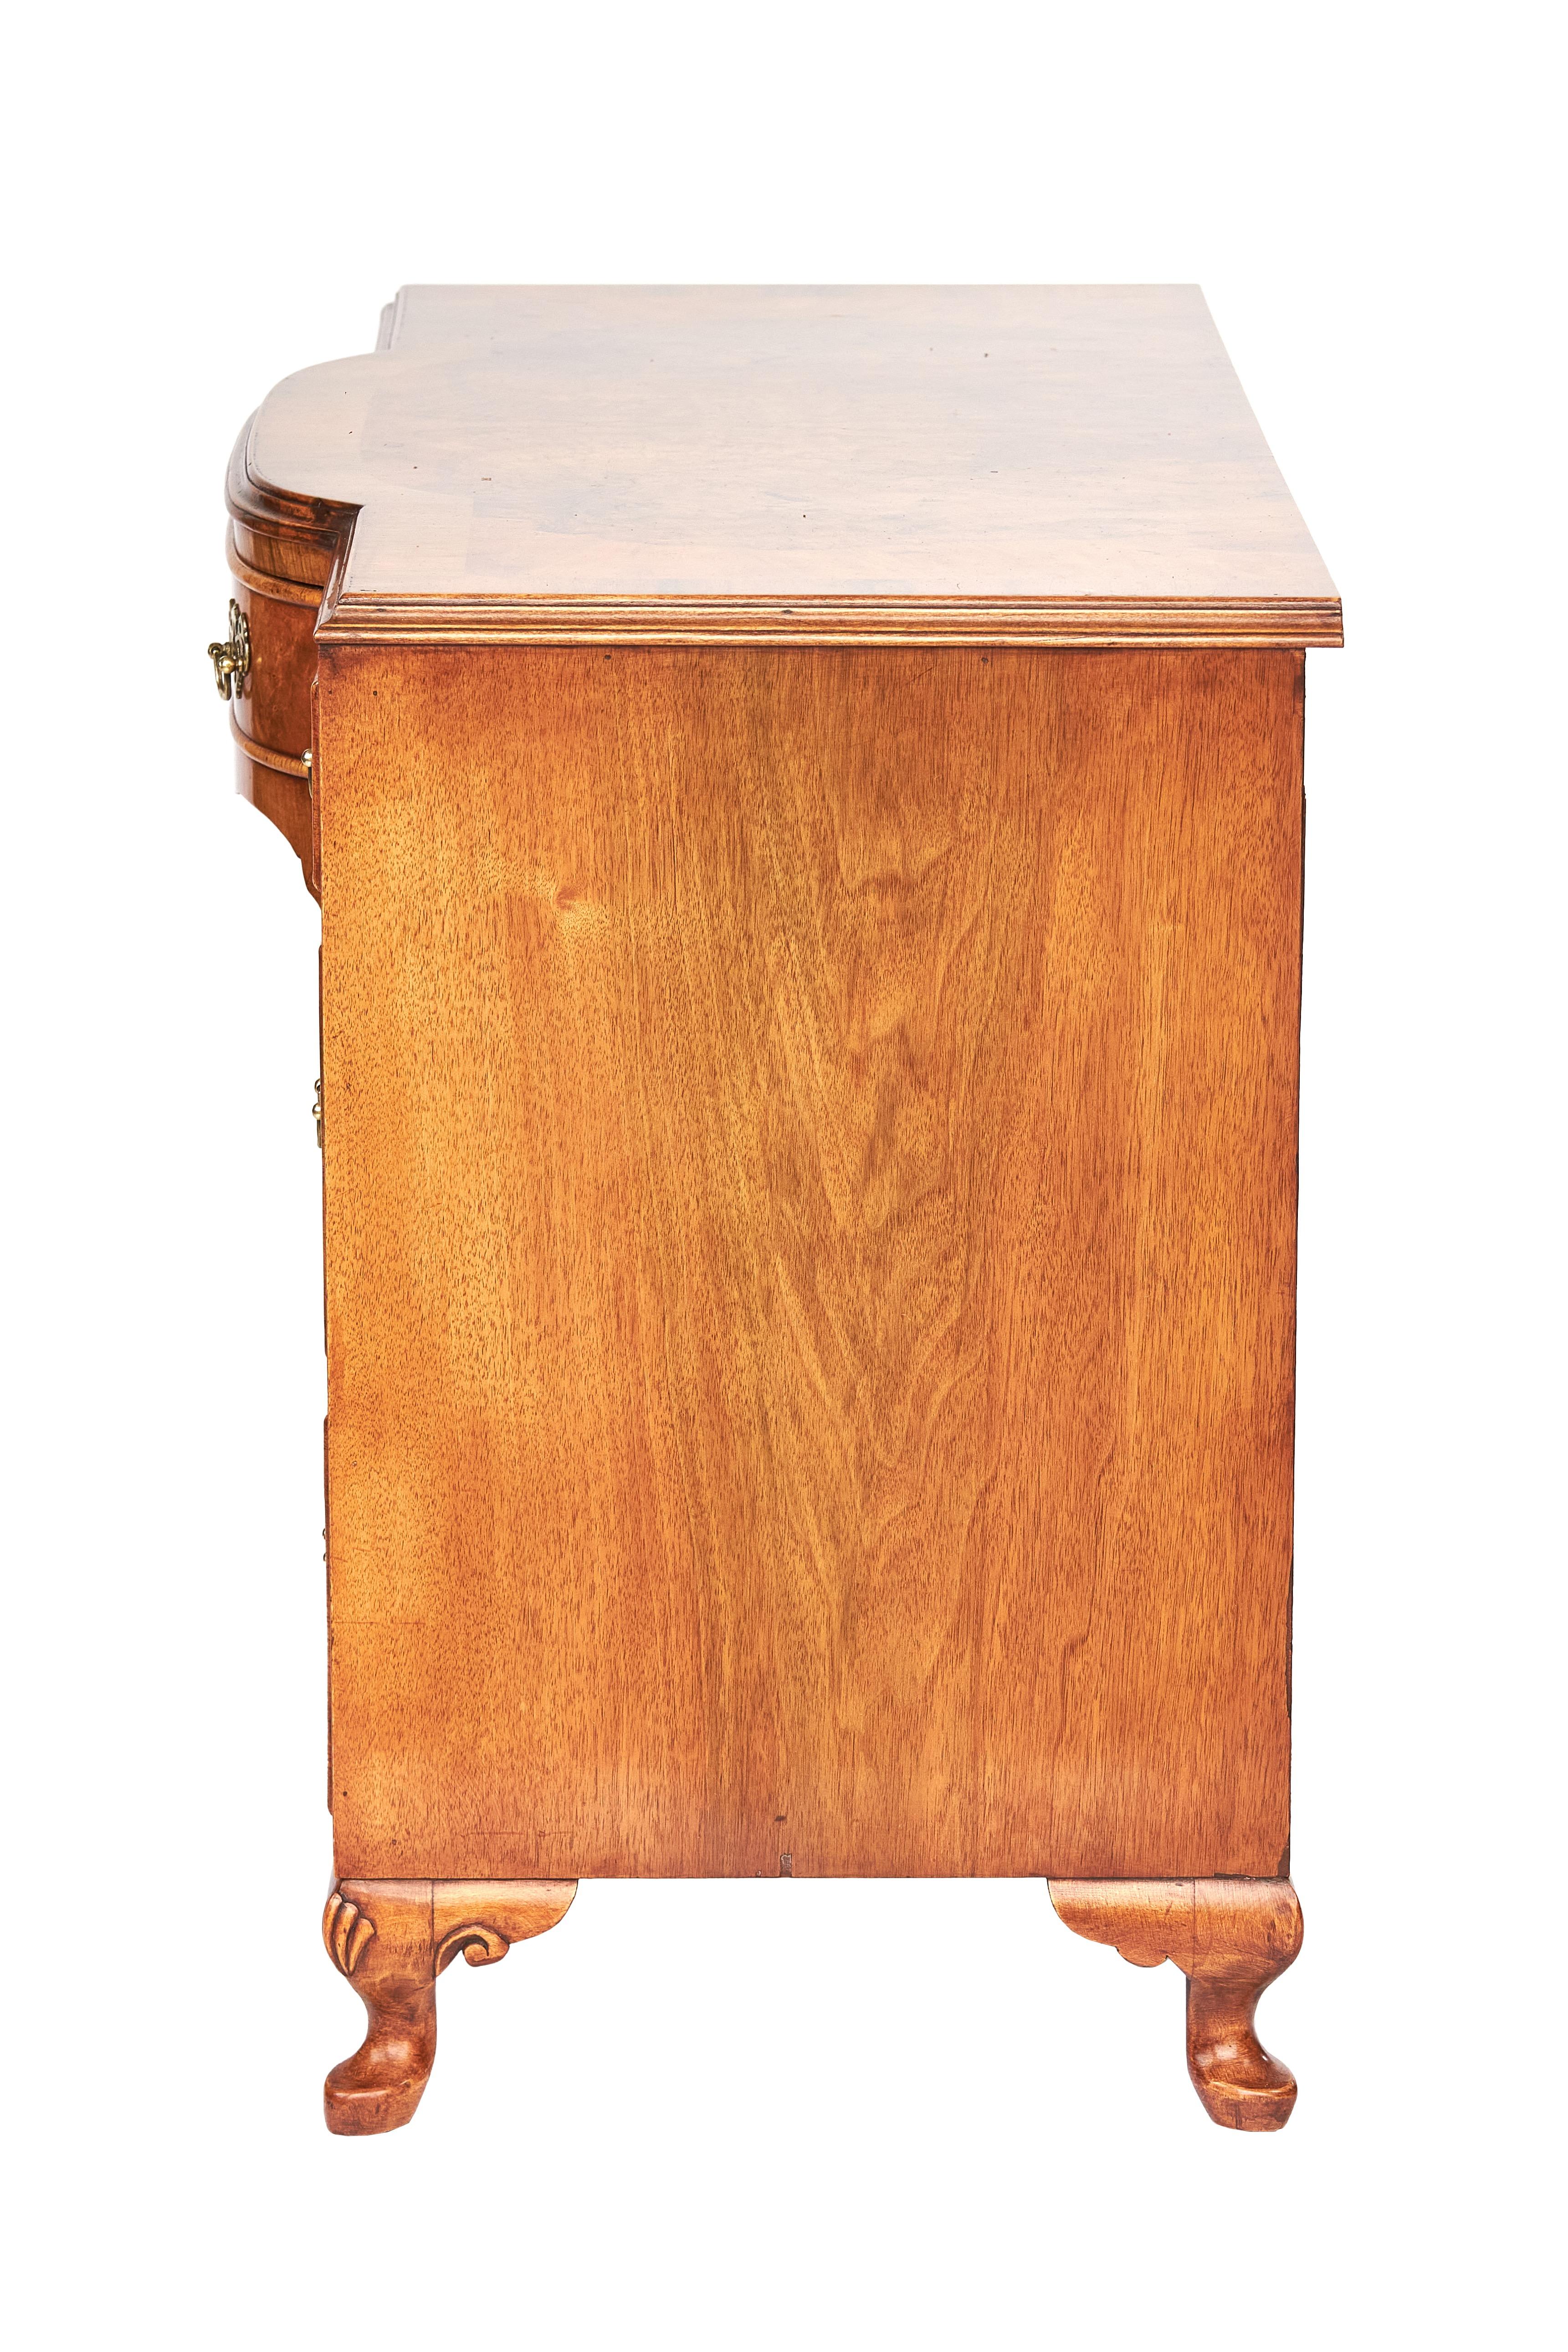 Walnut Queen Anne Style Kneehole Burr Walnut Dressing Table with Stool For Sale 2